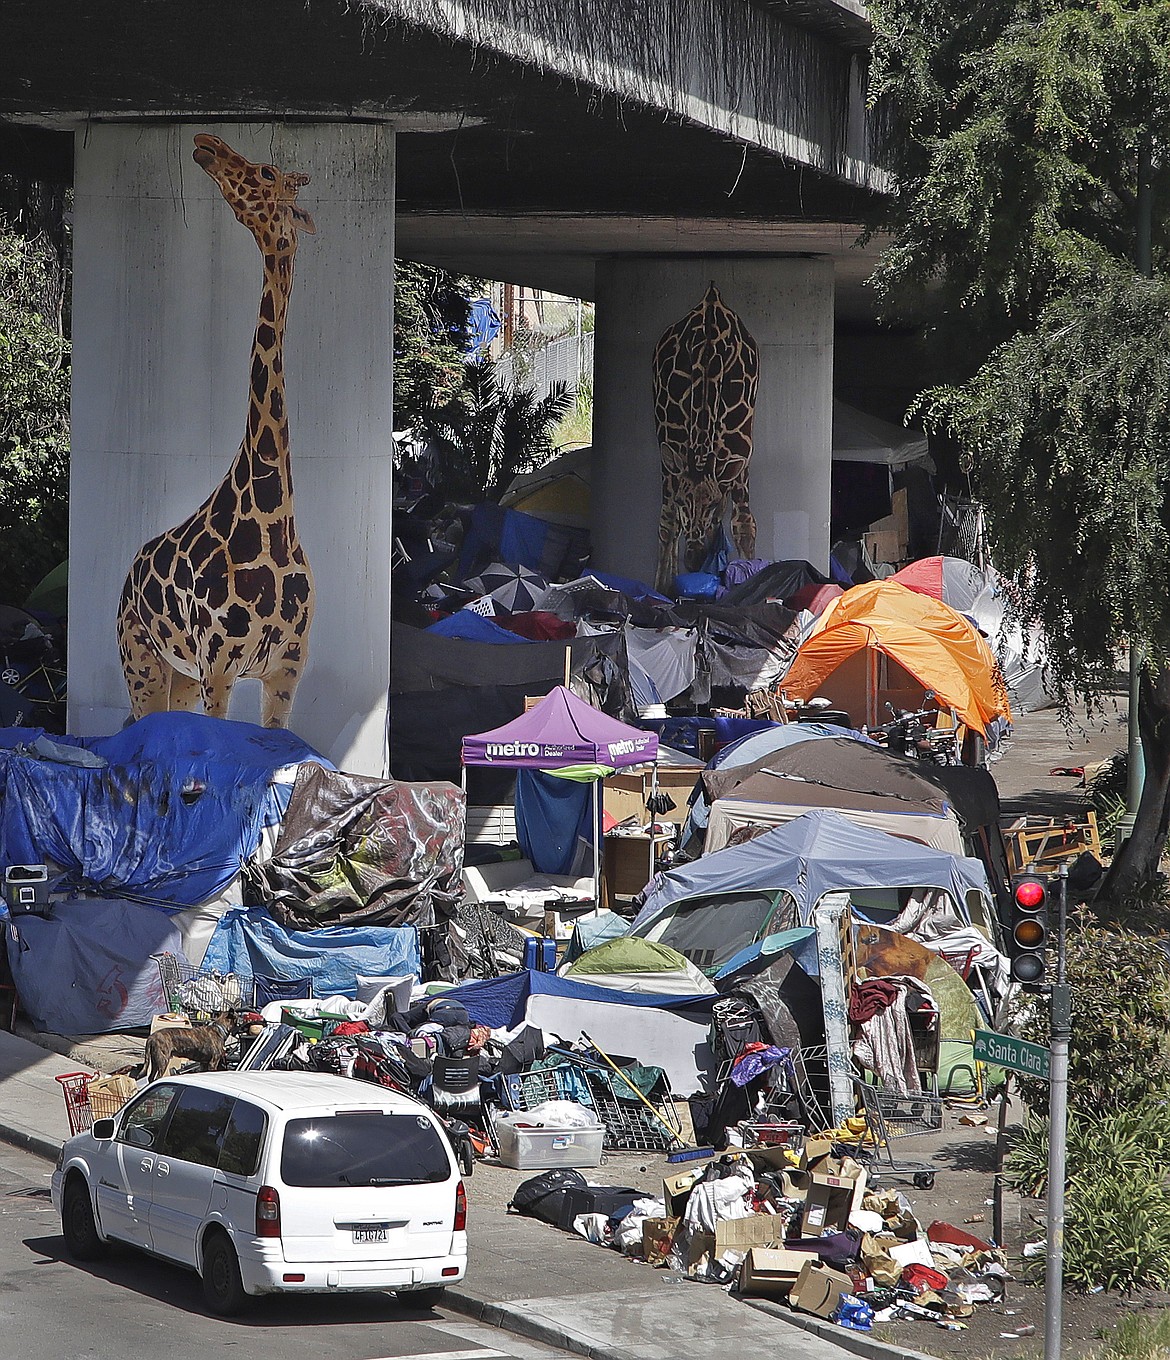 A homeless encampment is seen under a freeway overpass on Thursday, May 7, 2020, in Oakland, Calif. The U.S. government is poised to report the worst set of job numbers since record-keeping began in 1948, a stunning snapshot of the toll the coronavirus has taken on a now-shattered economy. (AP Photo/Ben Margot)